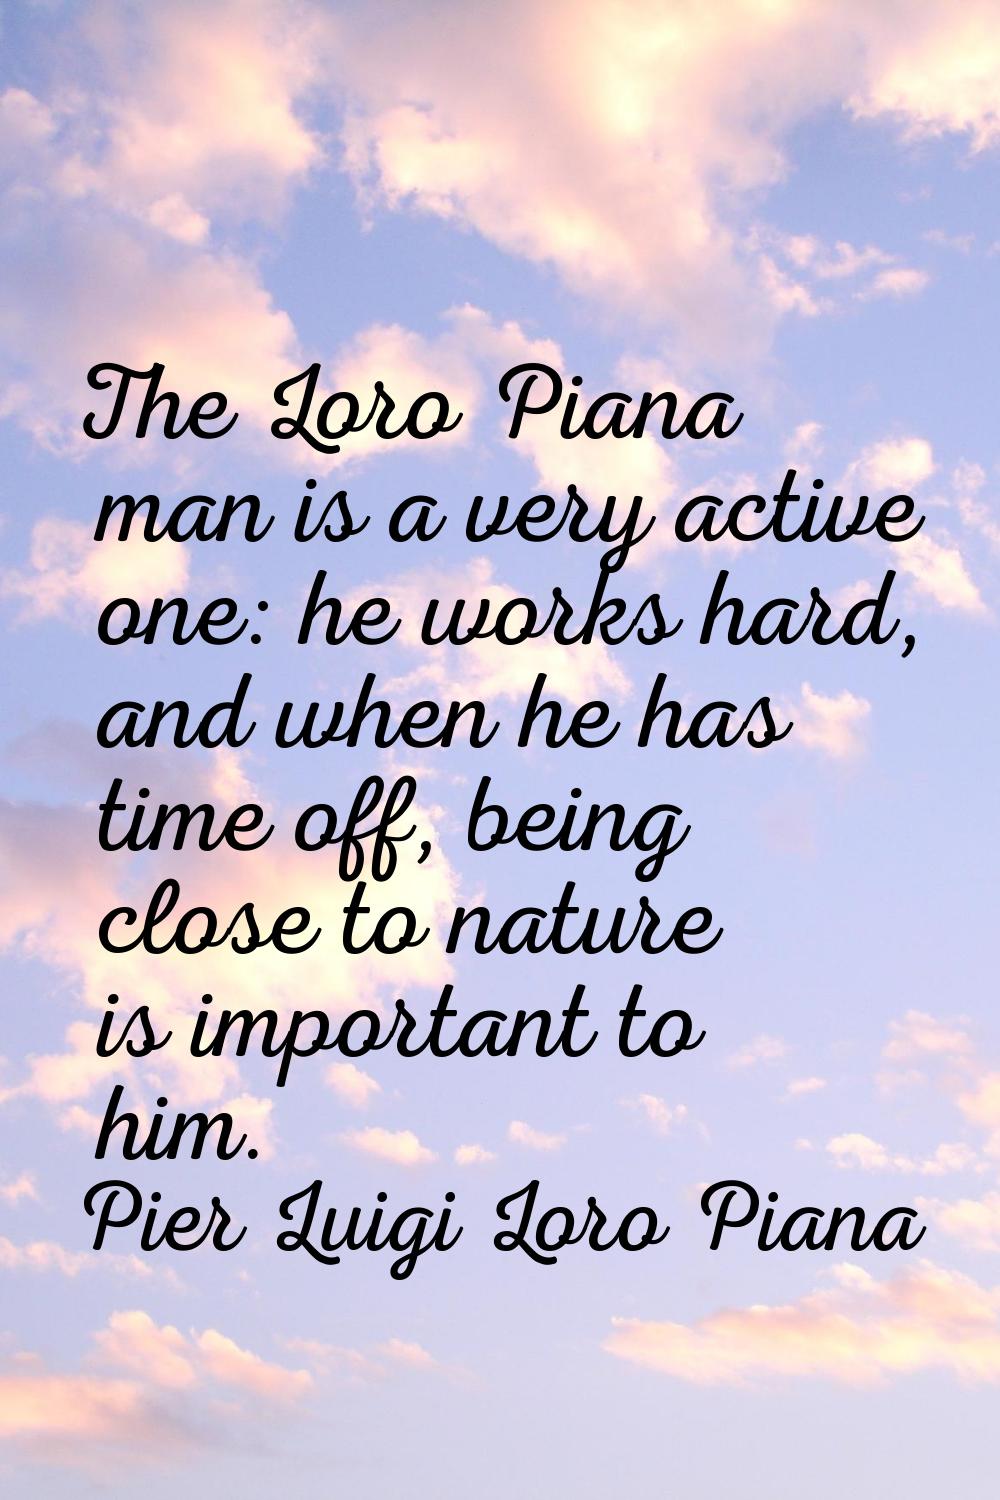 The Loro Piana man is a very active one: he works hard, and when he has time off, being close to na